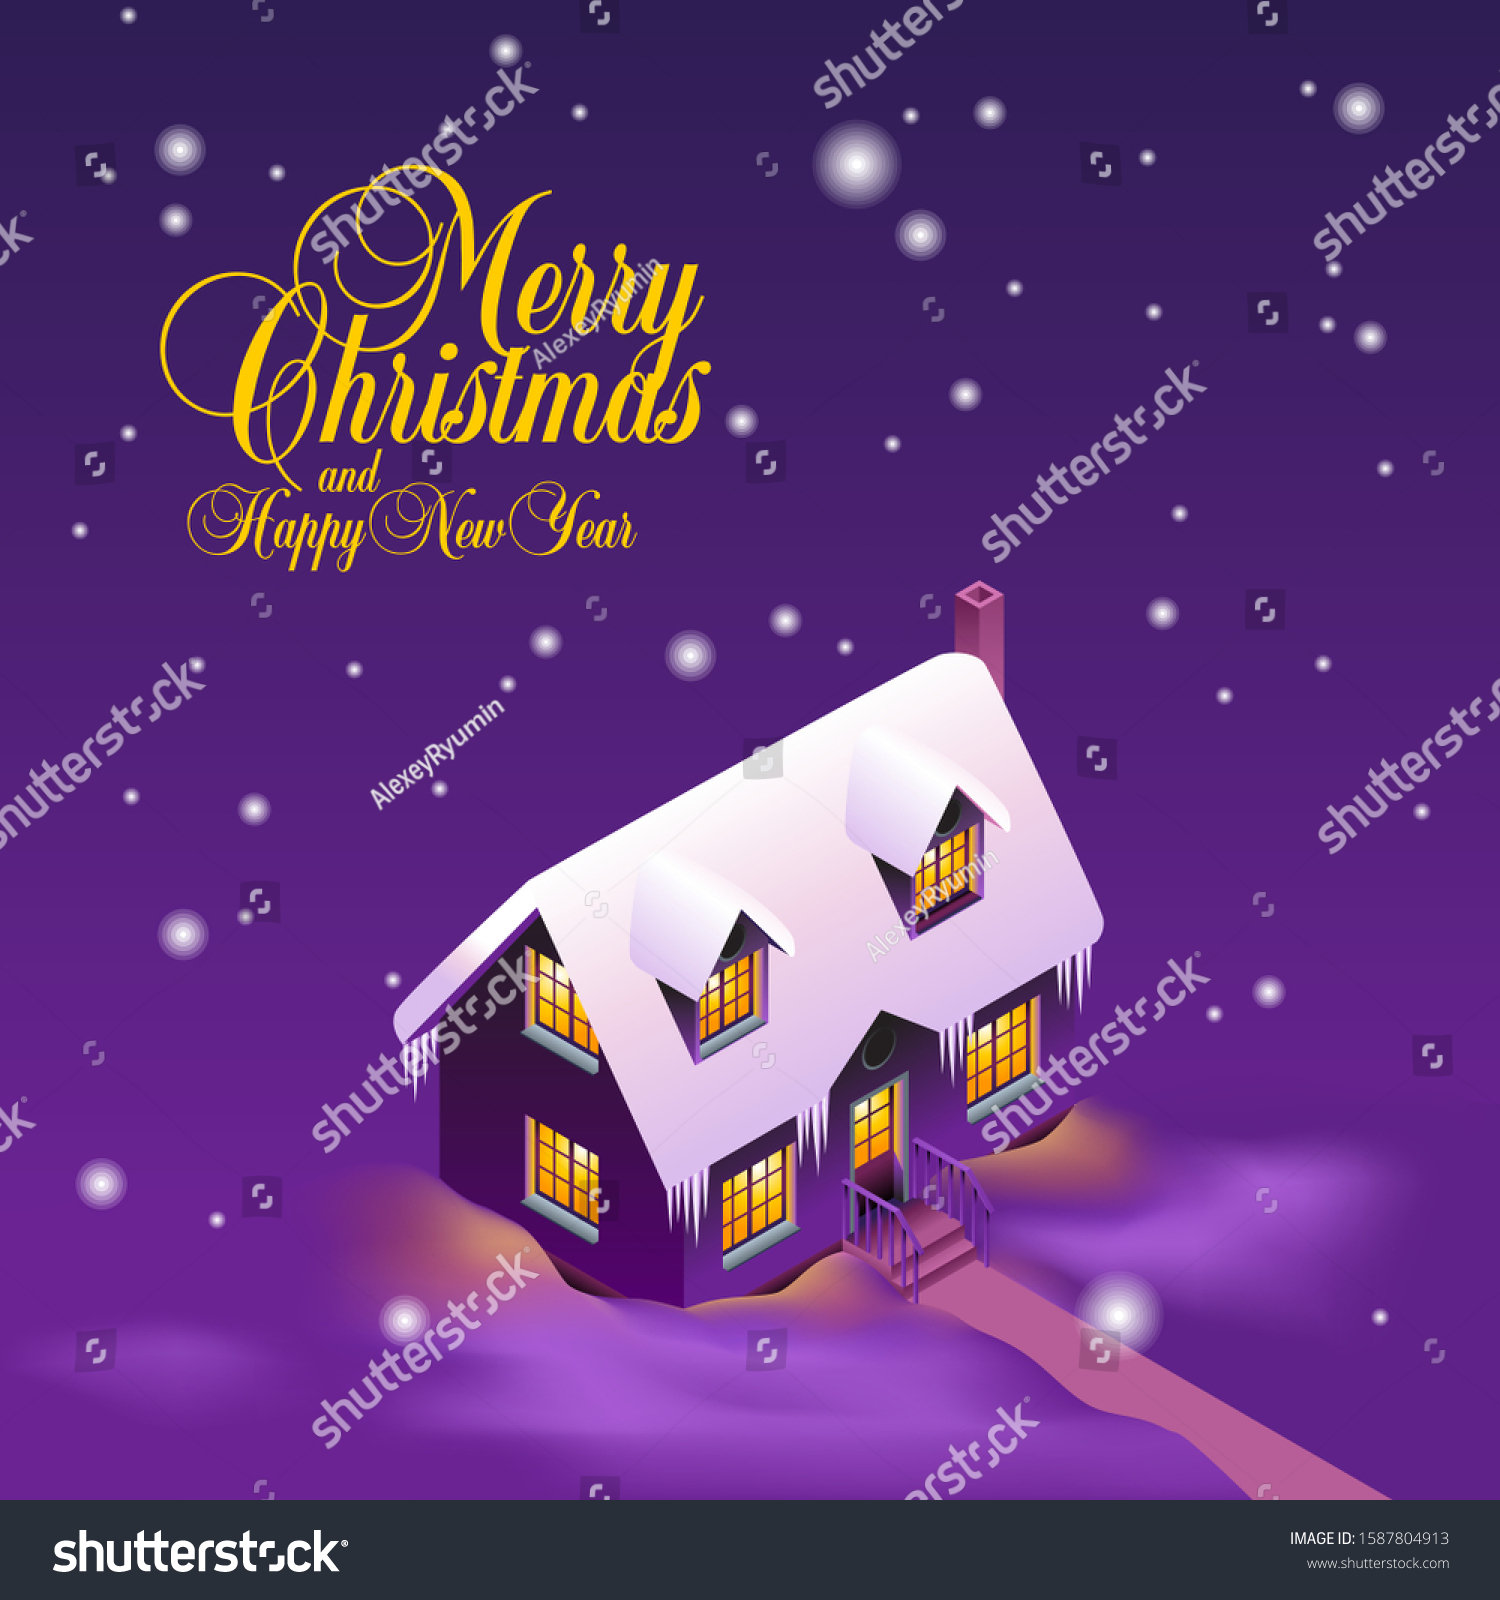 Sweet home and merry Christmas square vector social media or banner template with snowflakes on violet background.